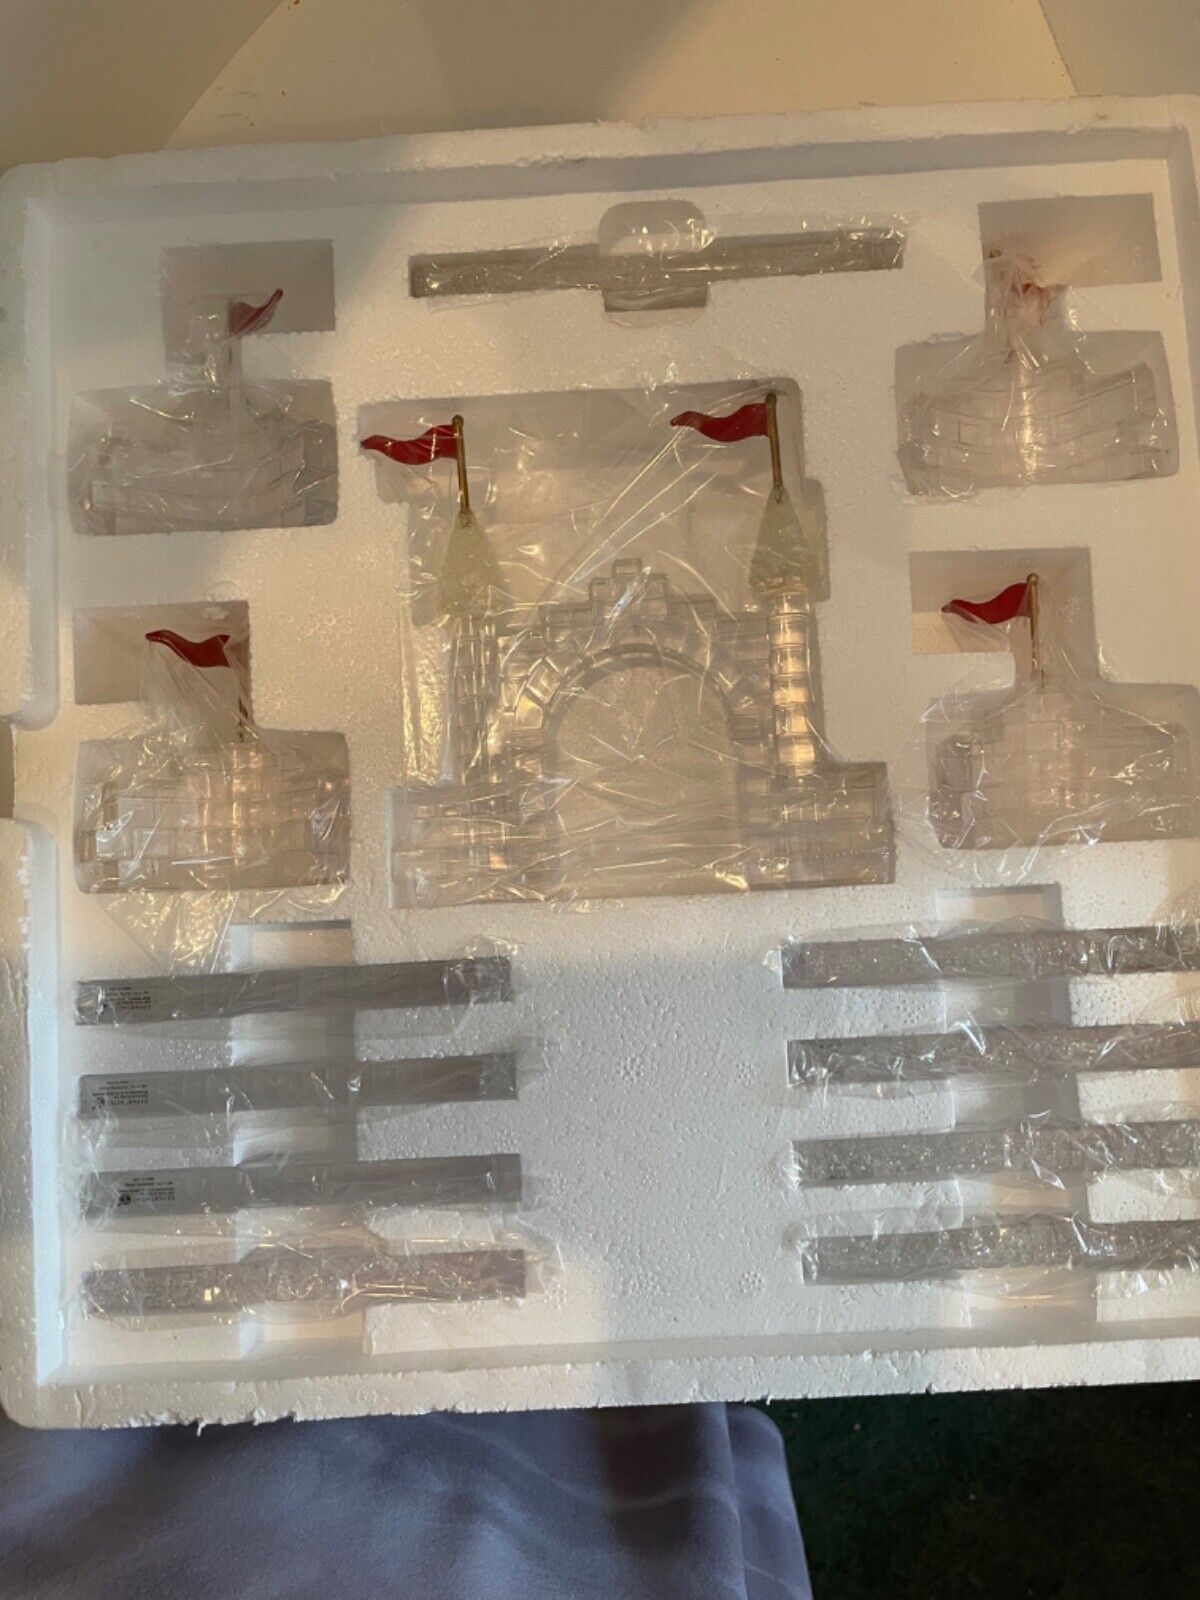 Dept 56 Village Accessories Ice Crystal Gate and Walls, Set of 14, 56.56716 NIB